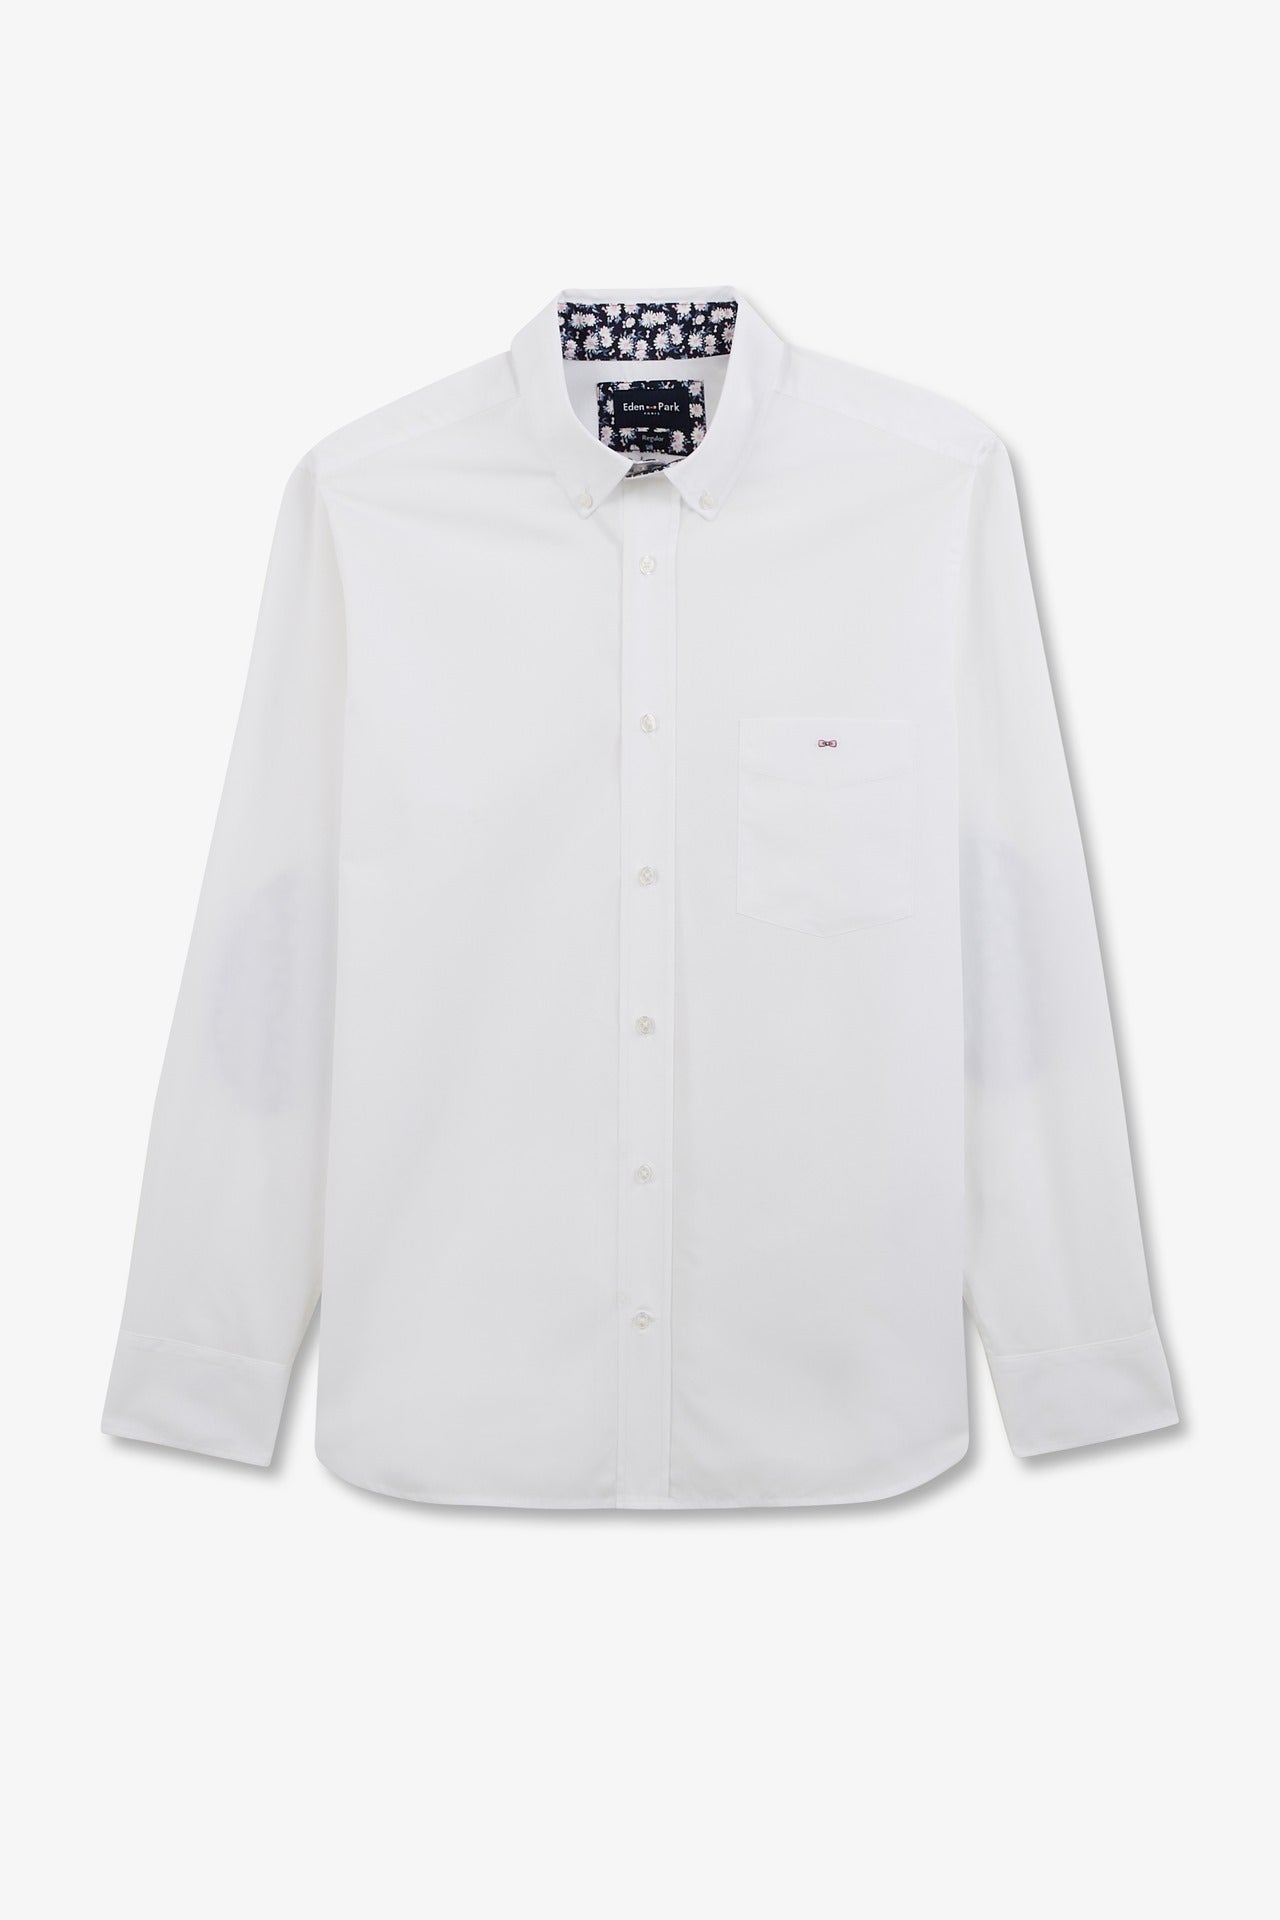 White shirt with floral elbow patches - Image 2